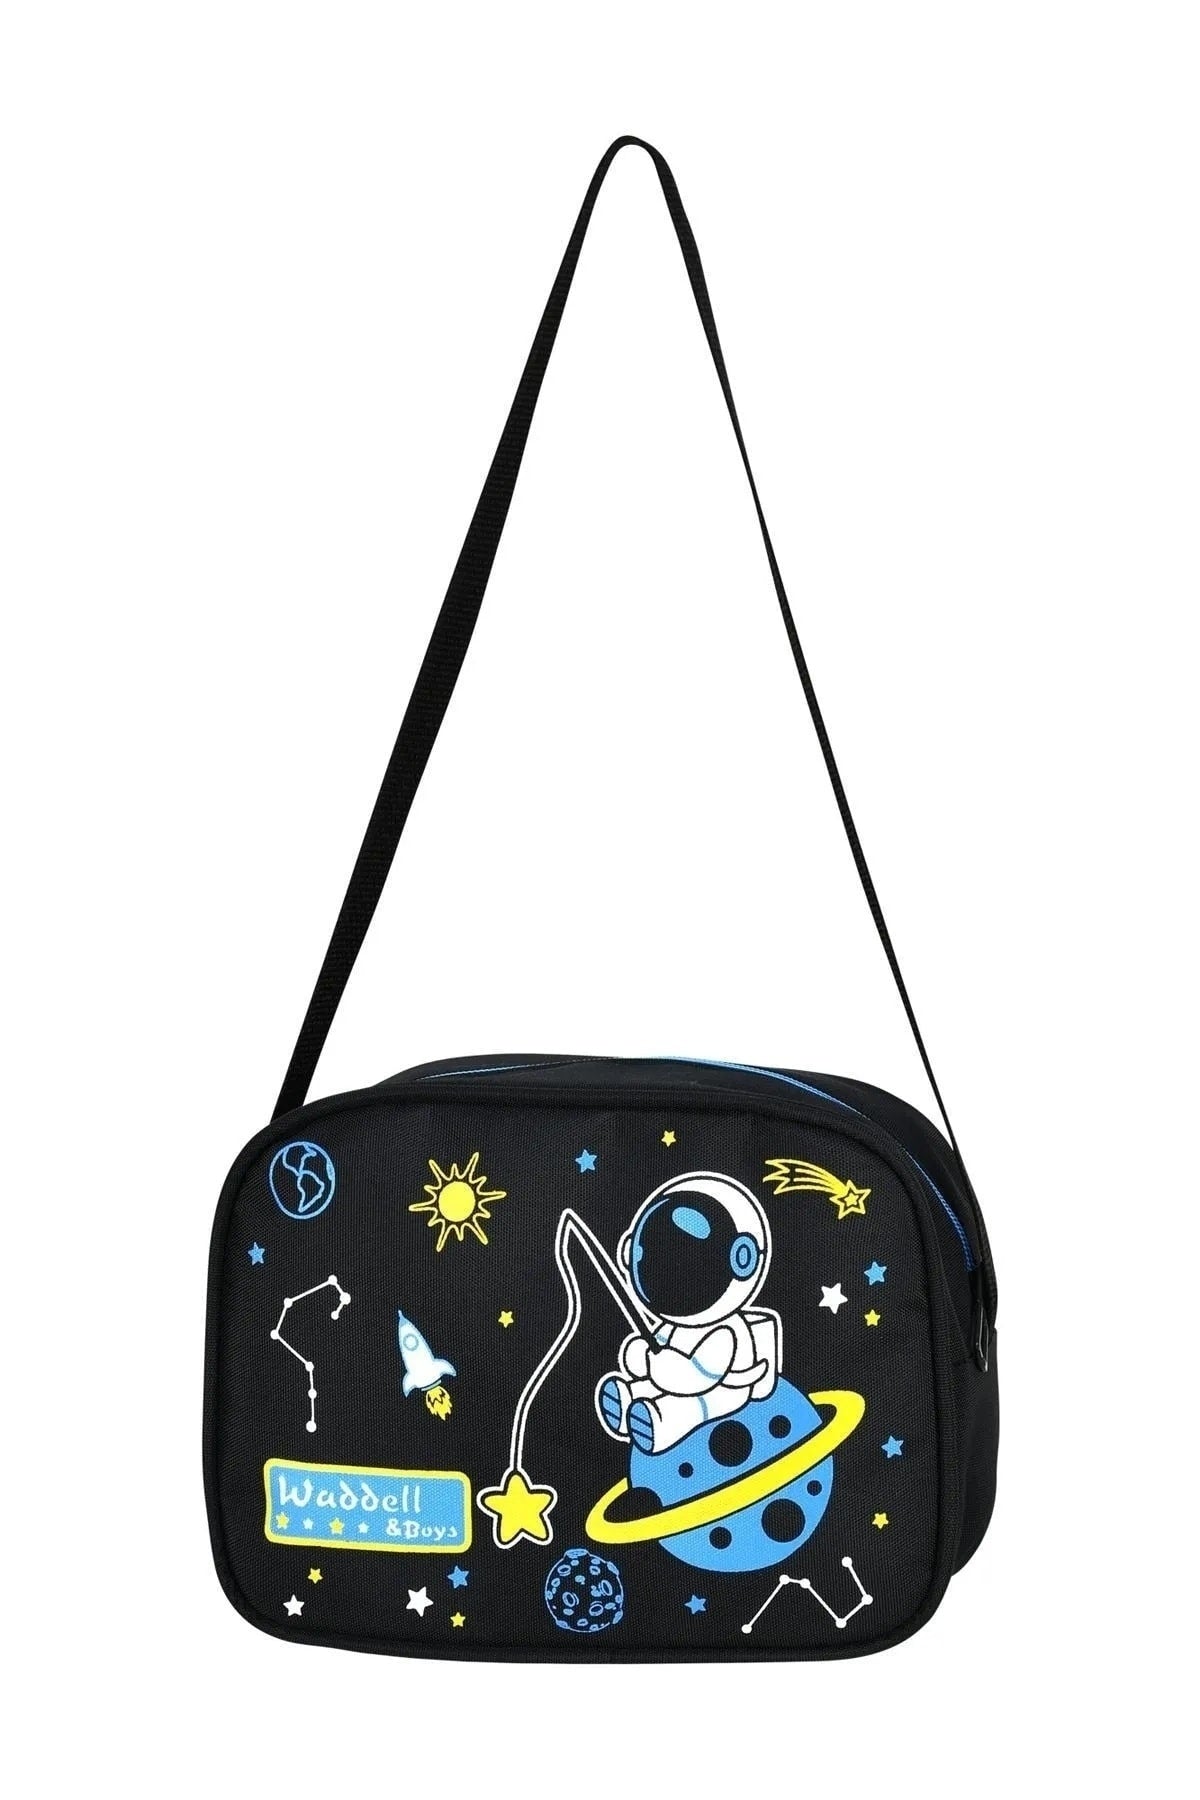 Astronaut Primary School And Lunch Box - 3004